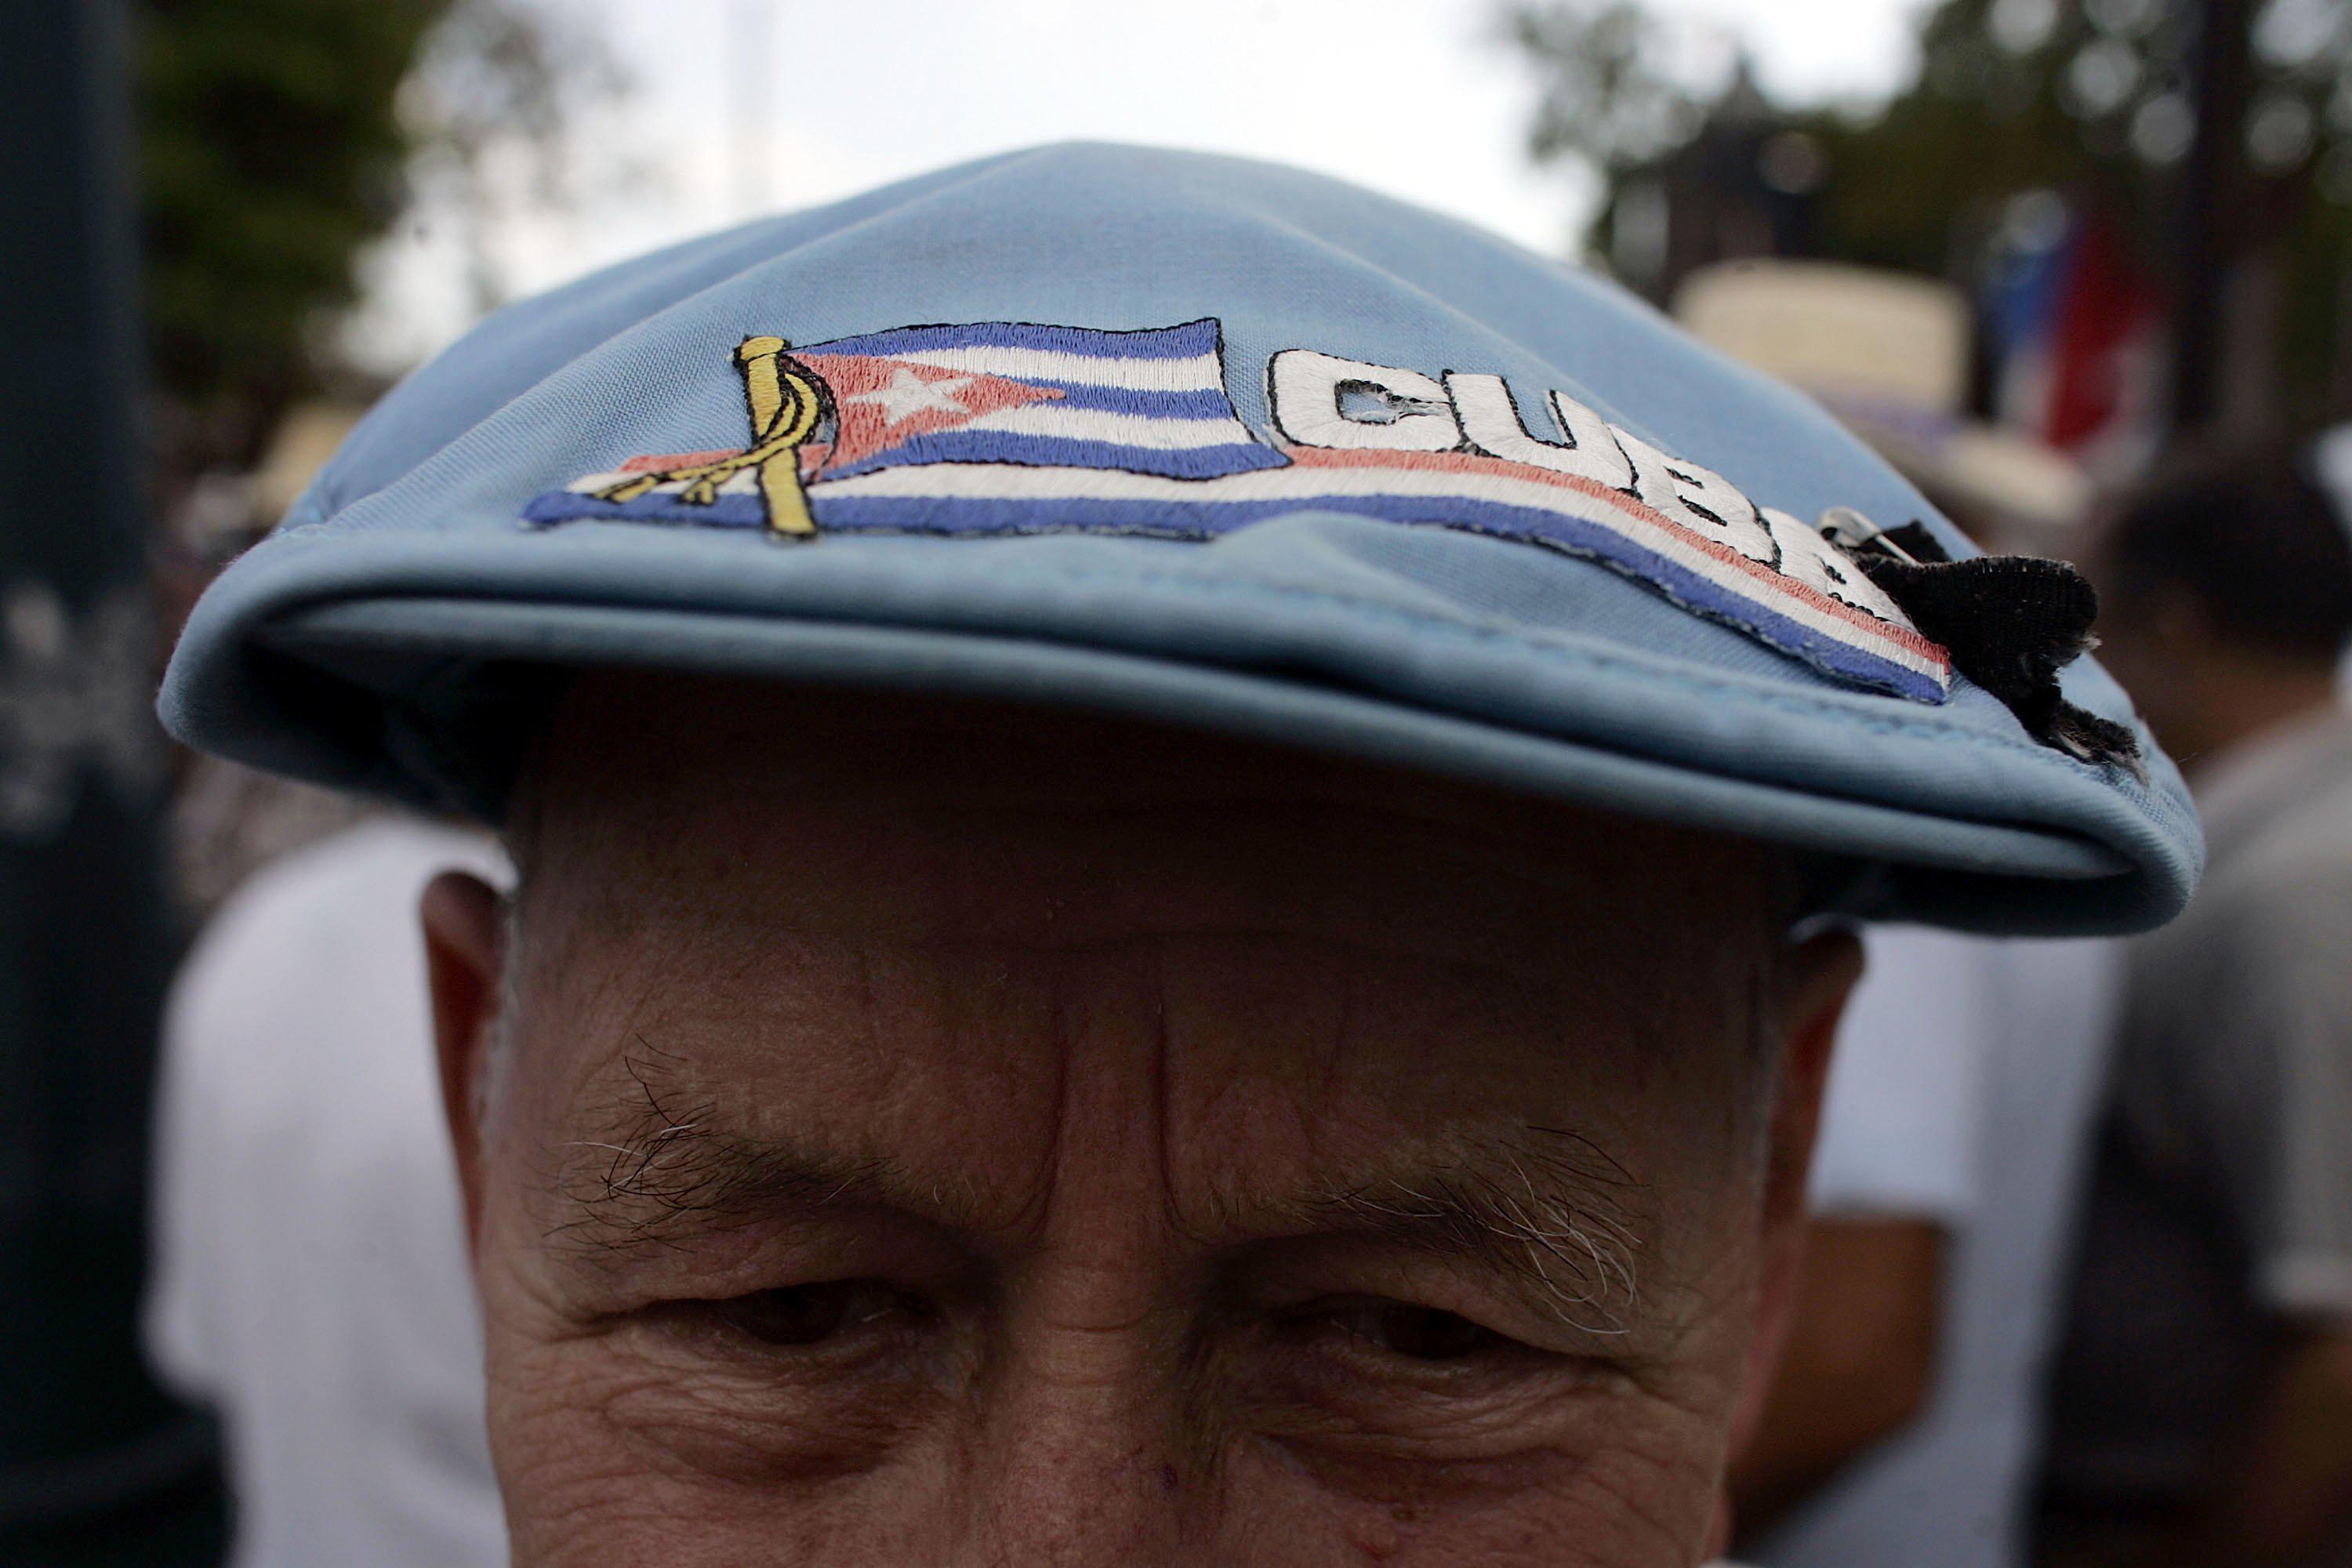 A close-up of a man's cap that says Cuba and features a Cuban flag.